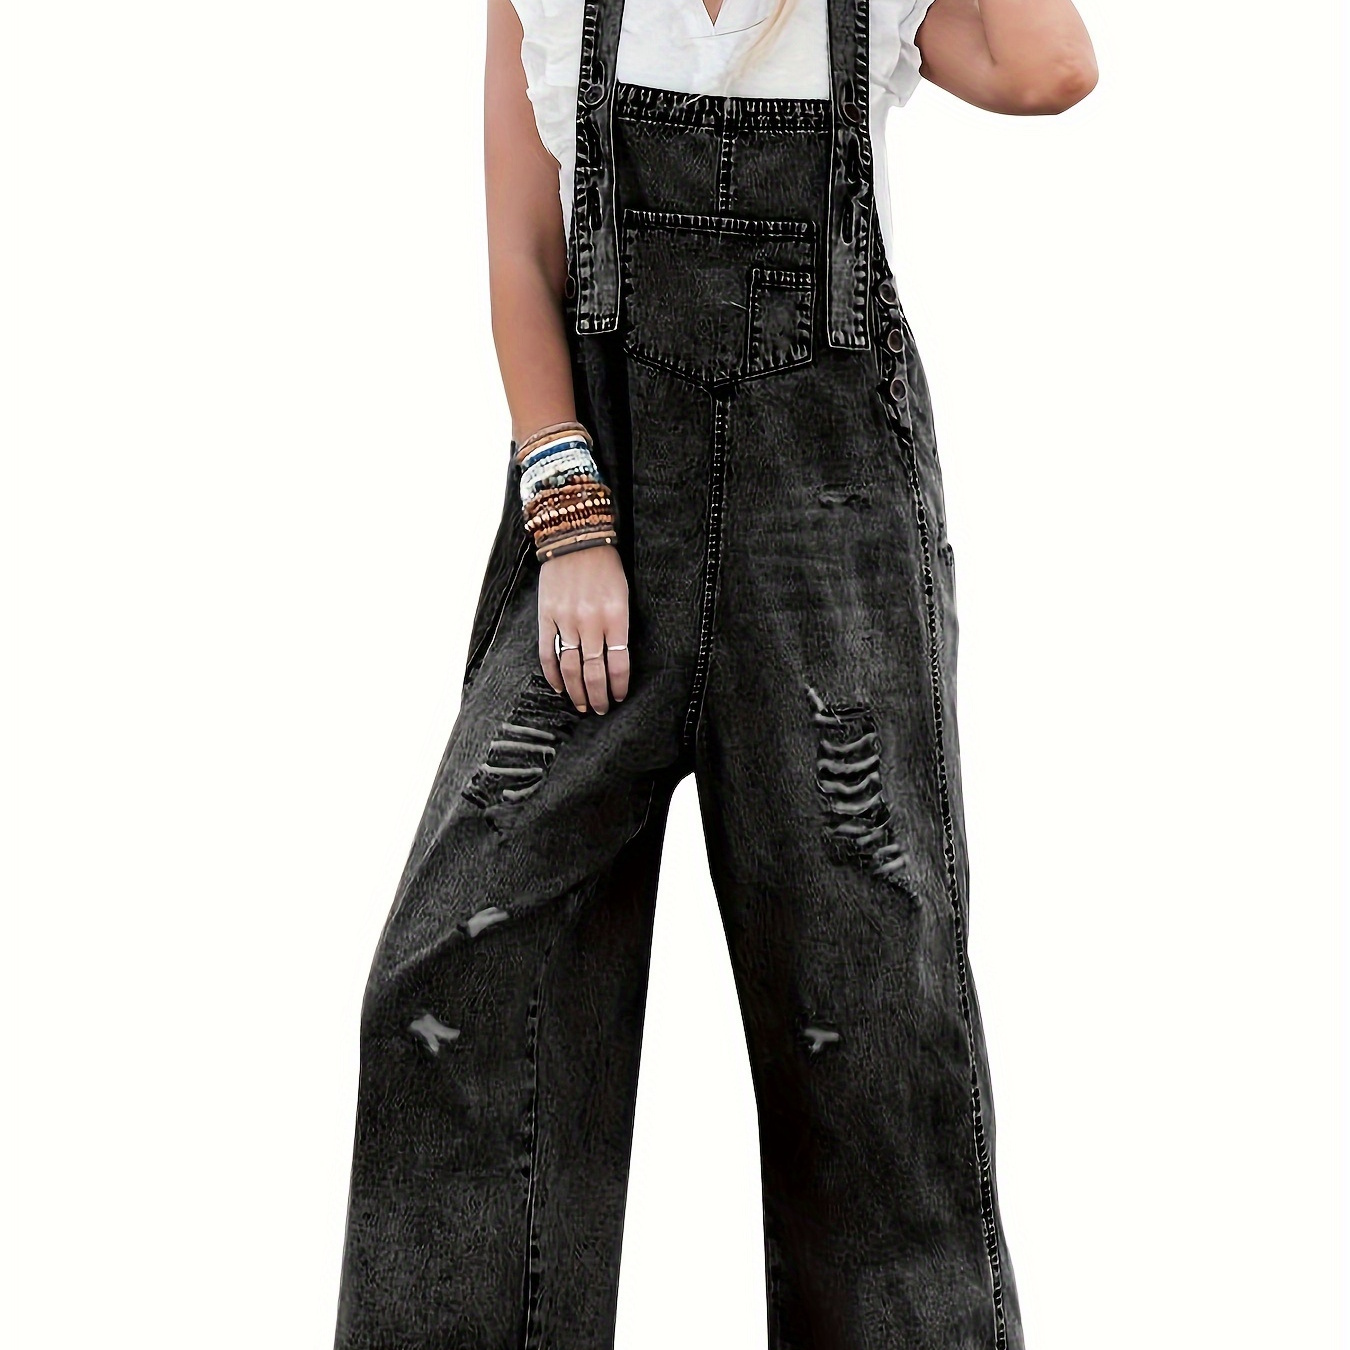 

Women's Casual Denim Overalls Loose Adjustable Strap Distressed Bib Jeans Overall Jumpsuits With Pocket